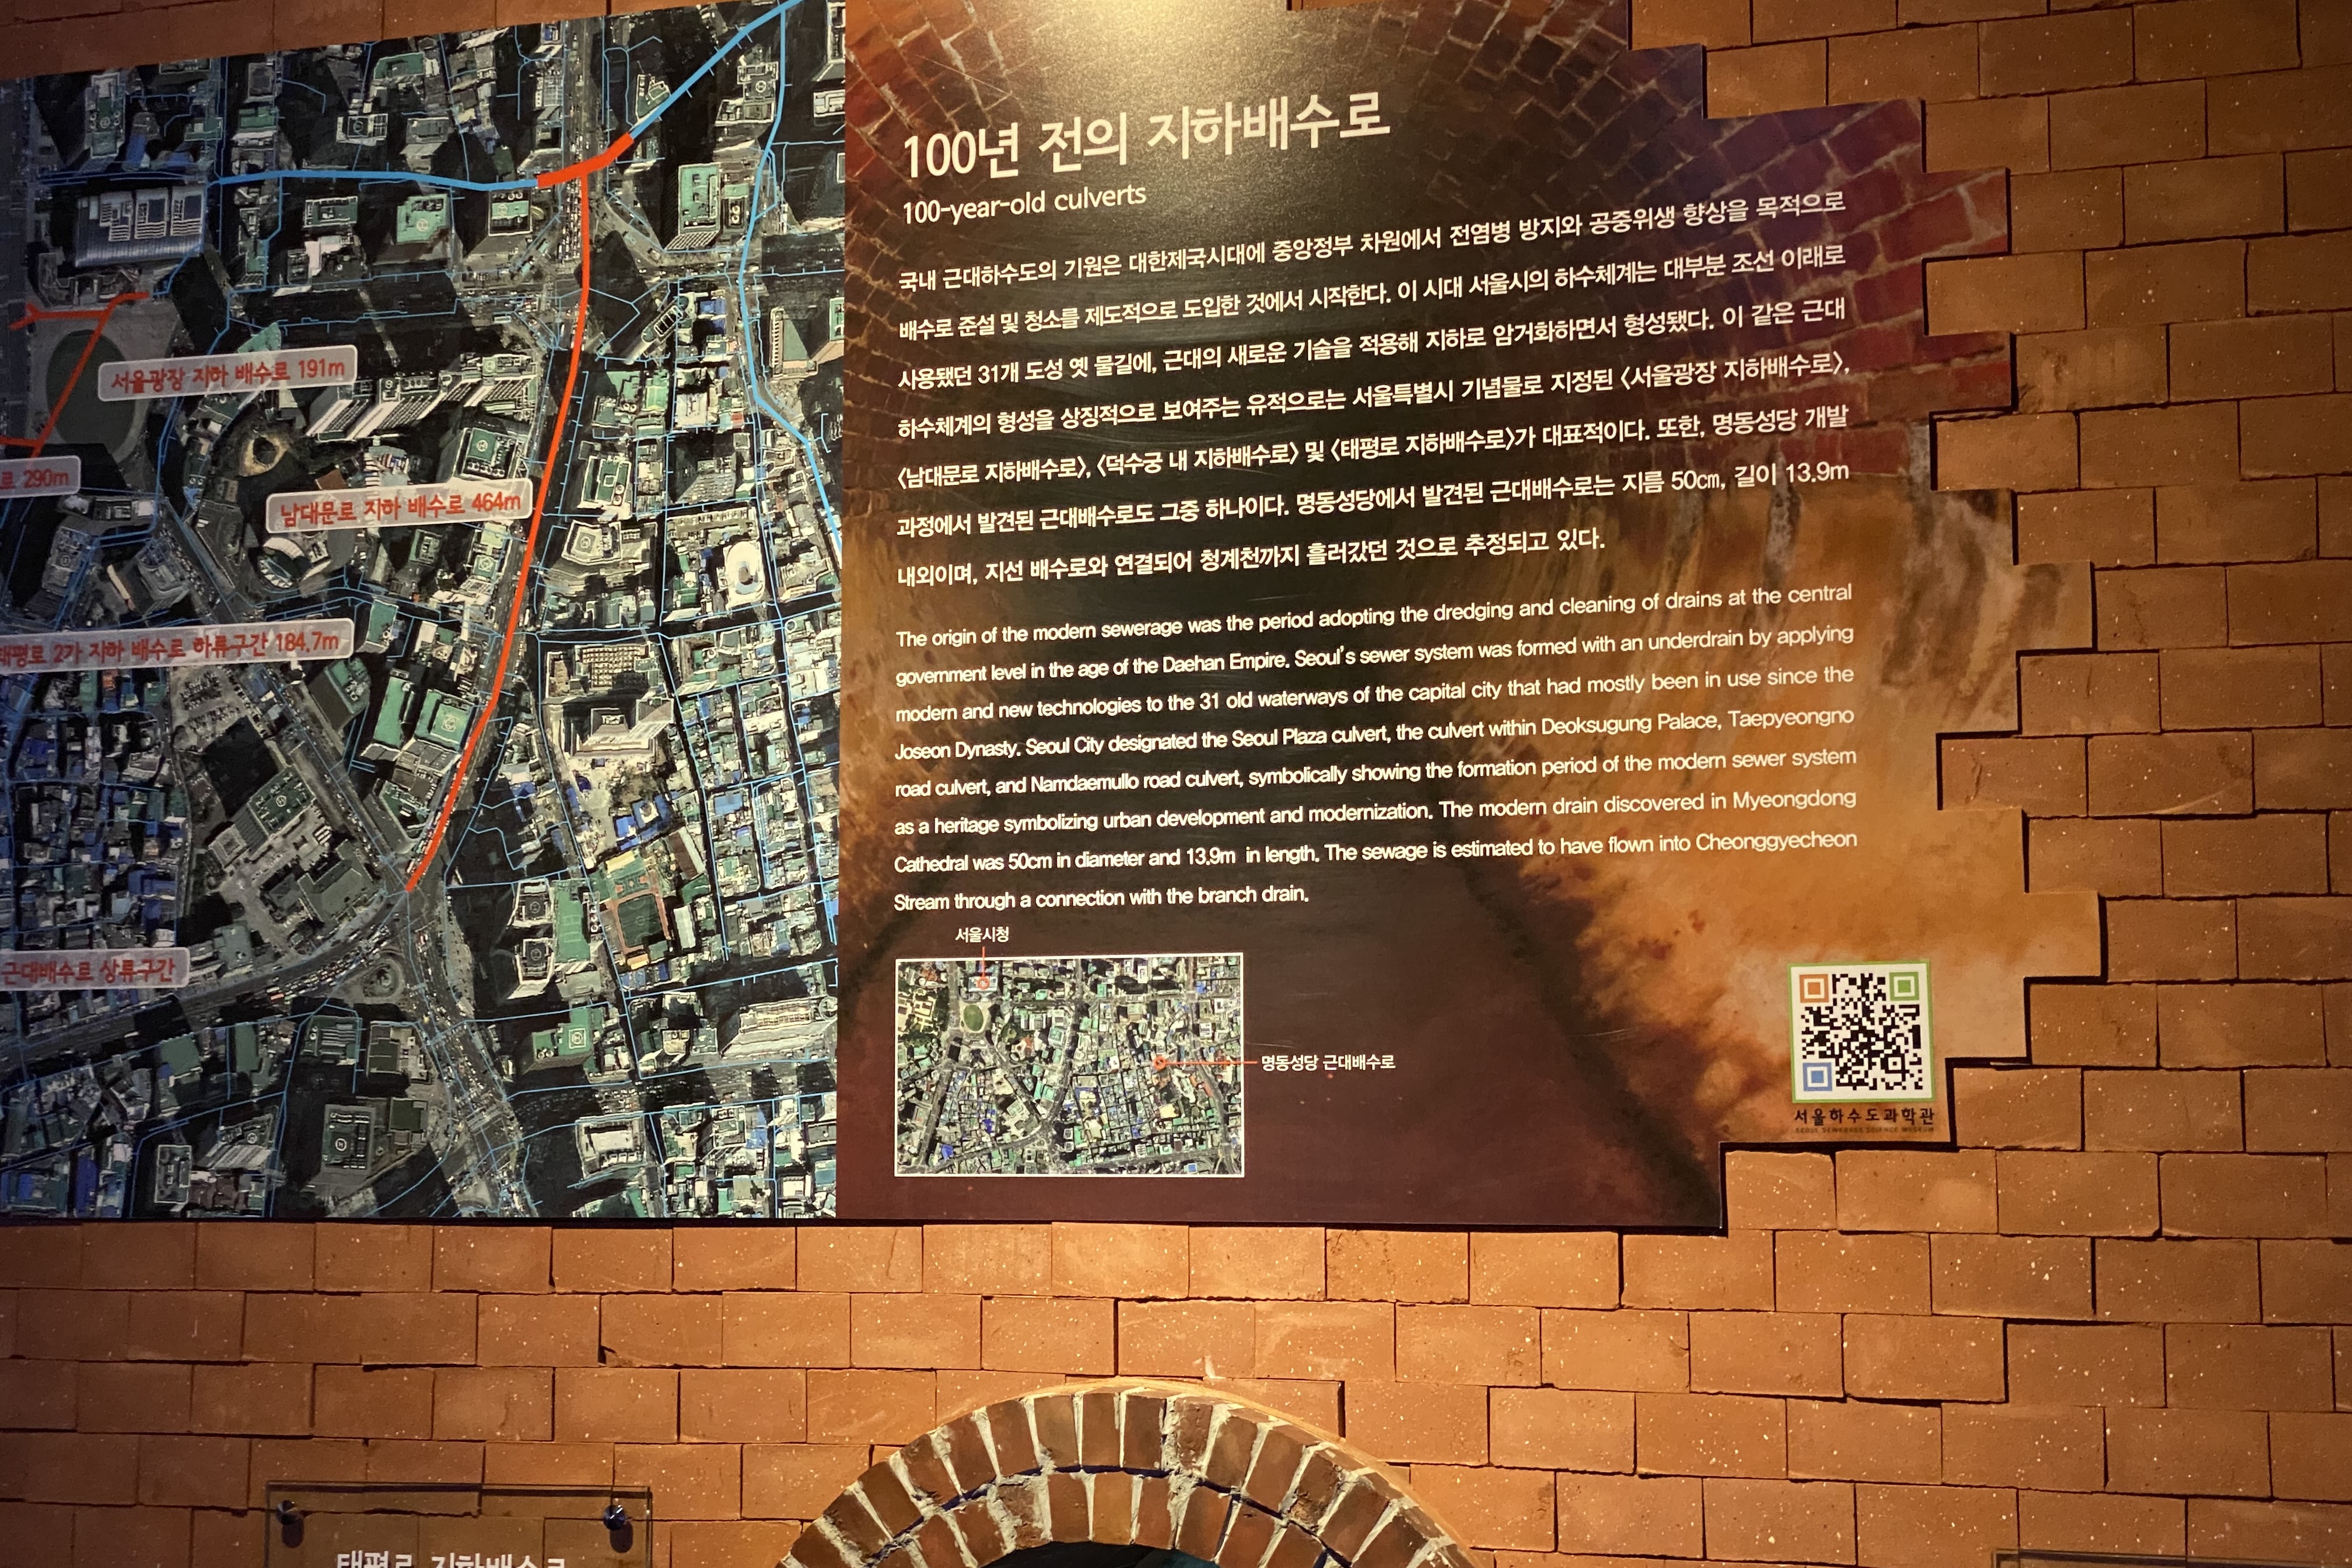 Seoul Sewer Science Museum4 : Description of an underground drainage system 100 years ago in Seoul Sewerage Science Museum